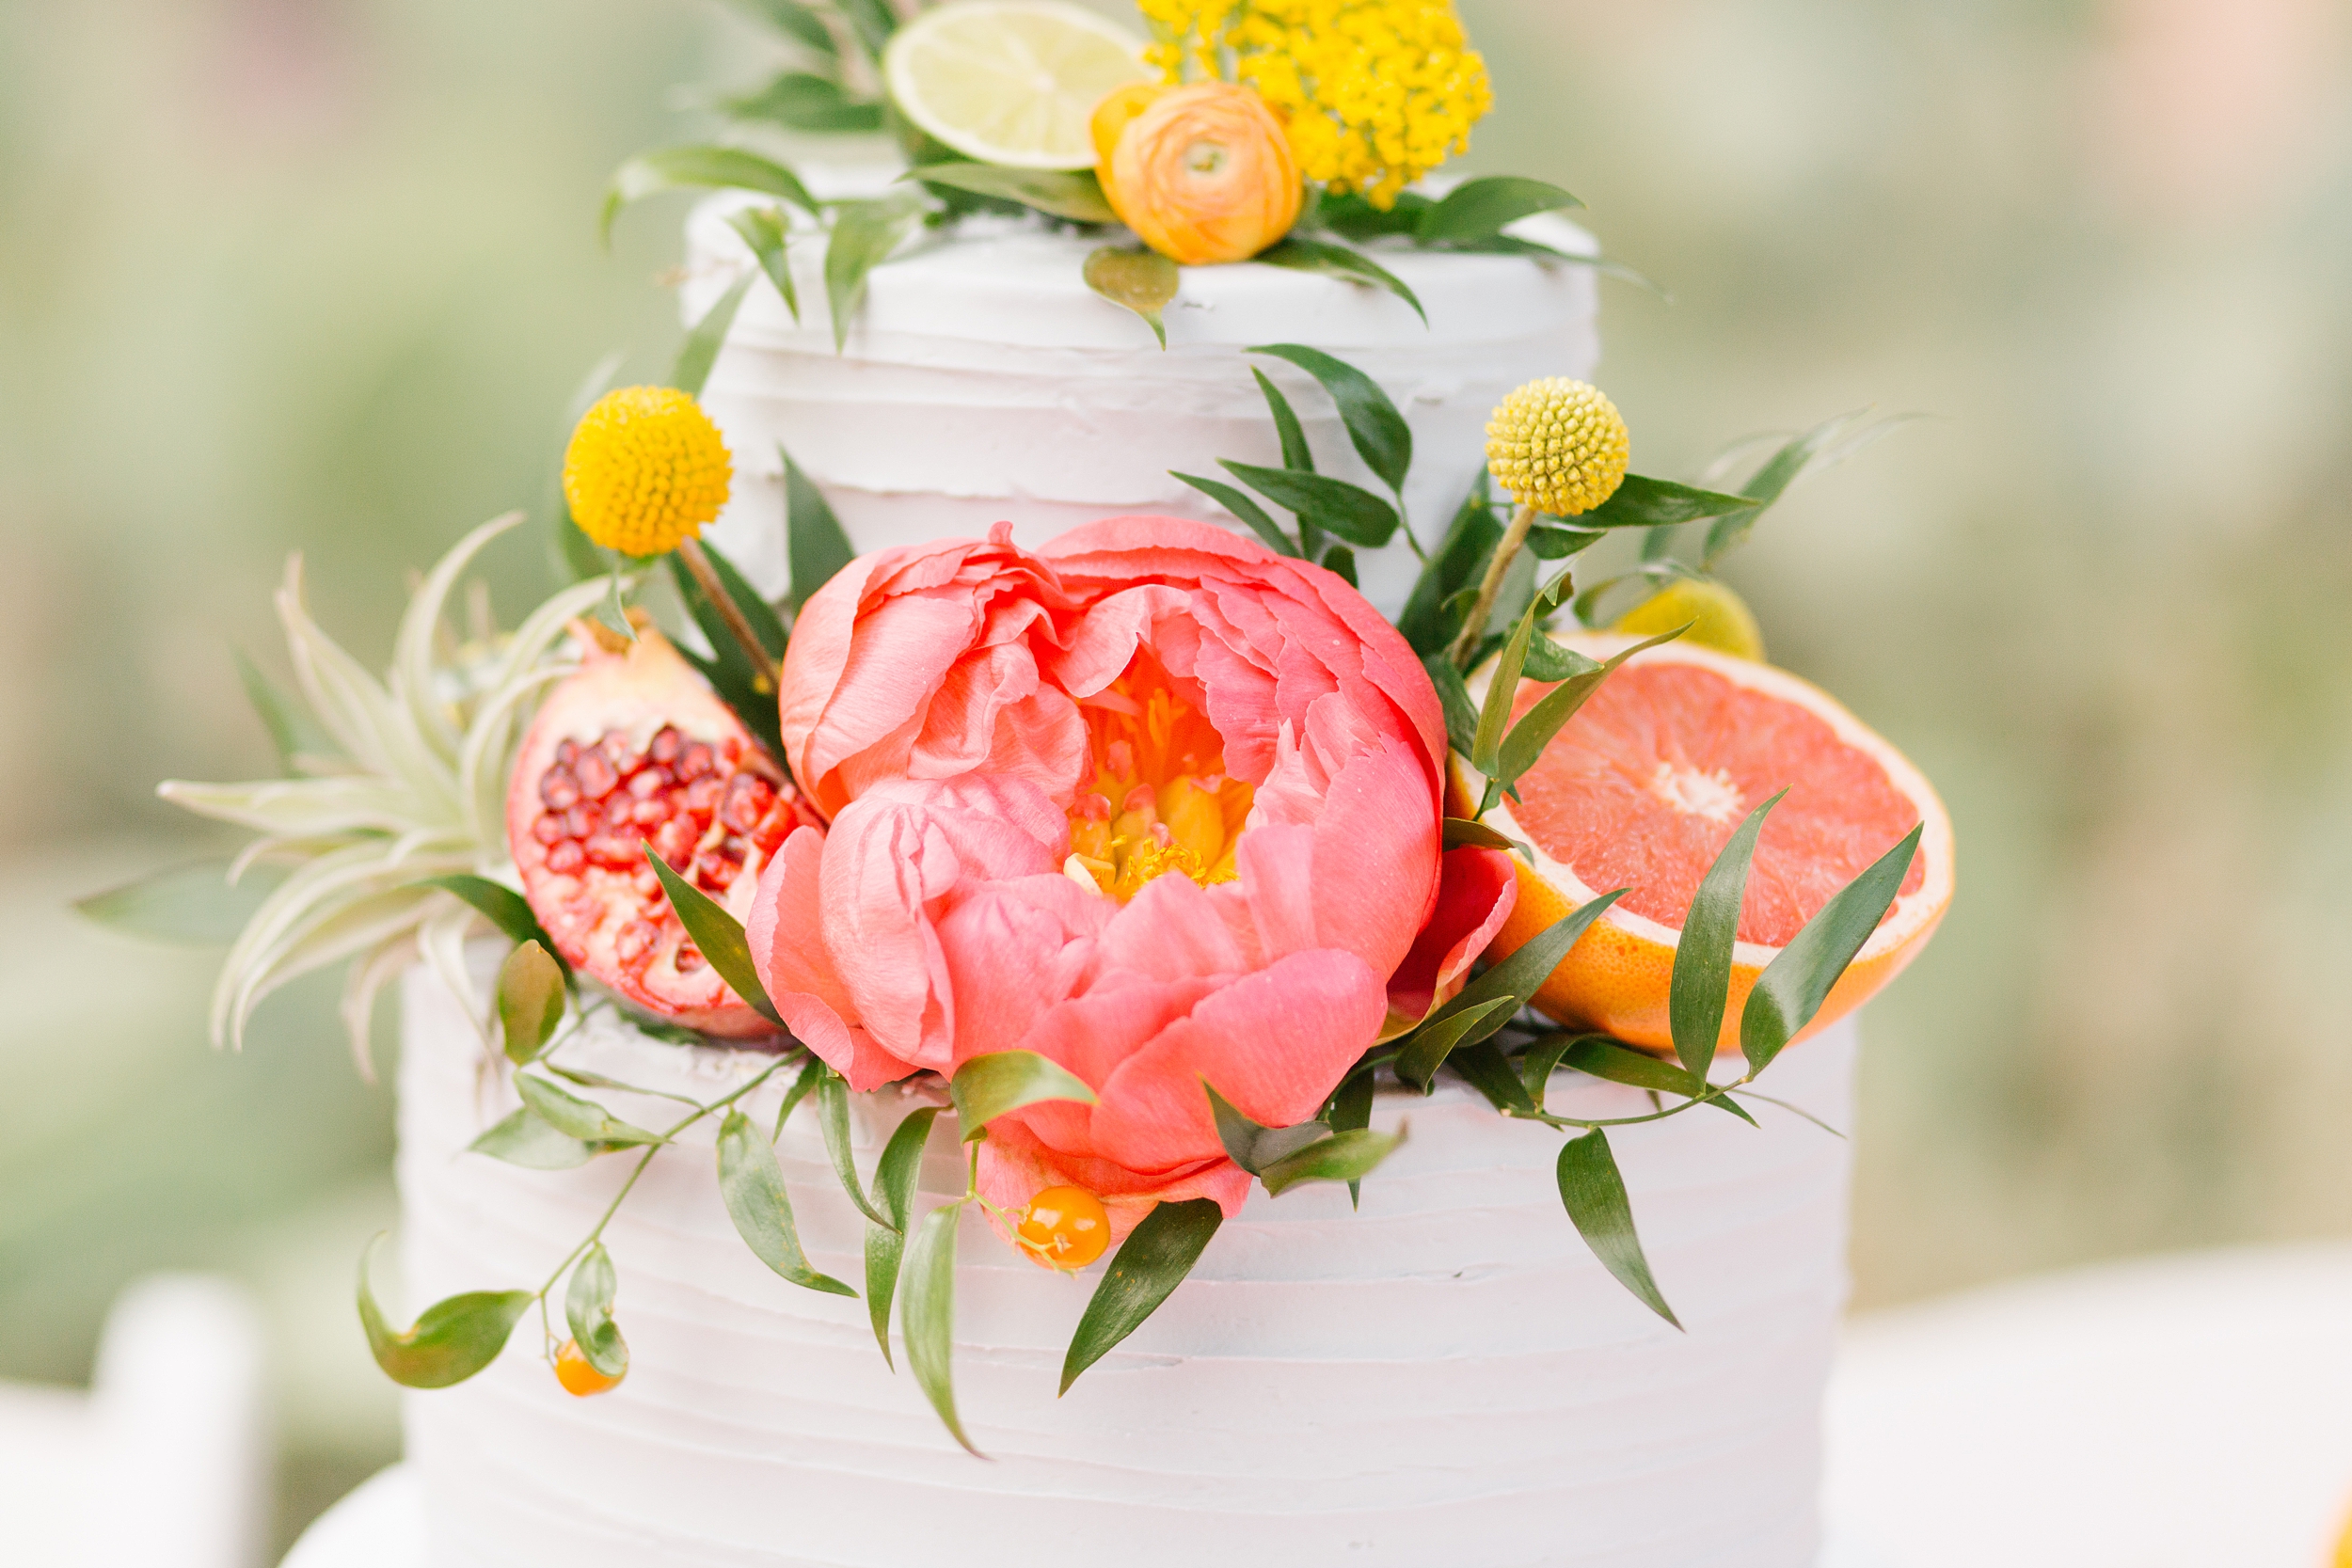 bright colored flowers, grapefruit and pomegranate on wedding cake